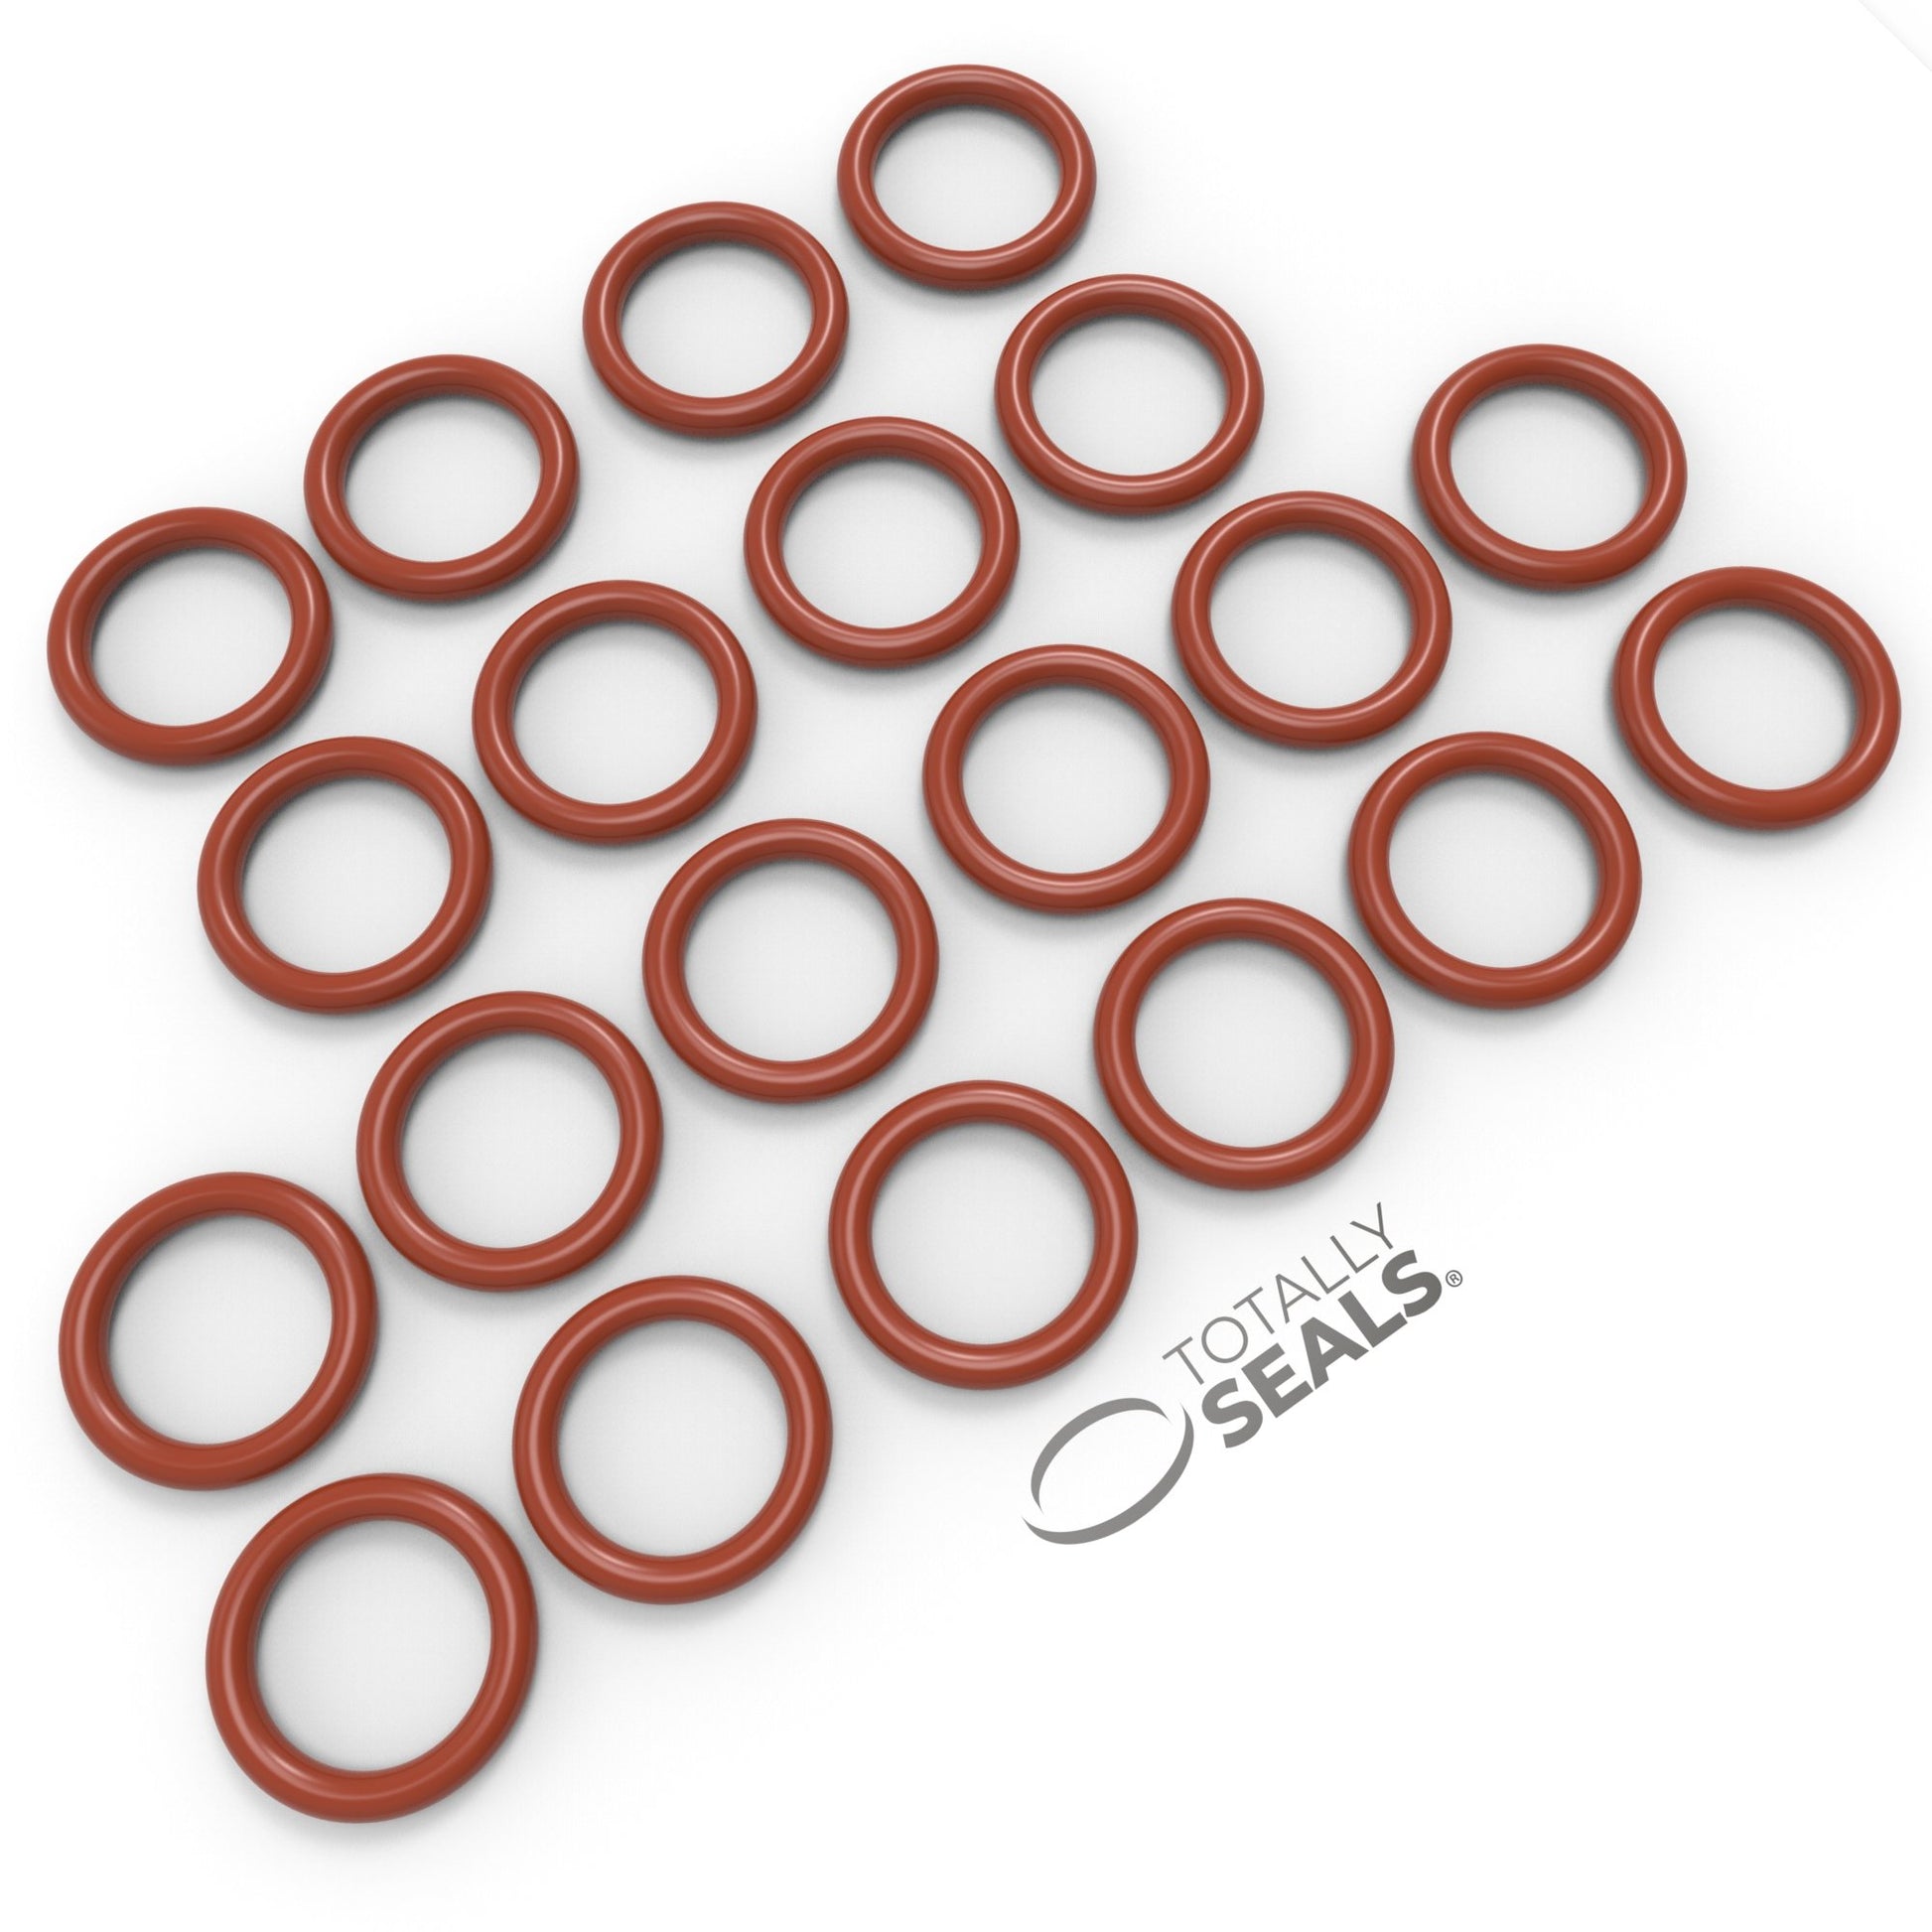 25mm x 2.5mm (30mm OD) Silicone O-Rings - Totally Seals®